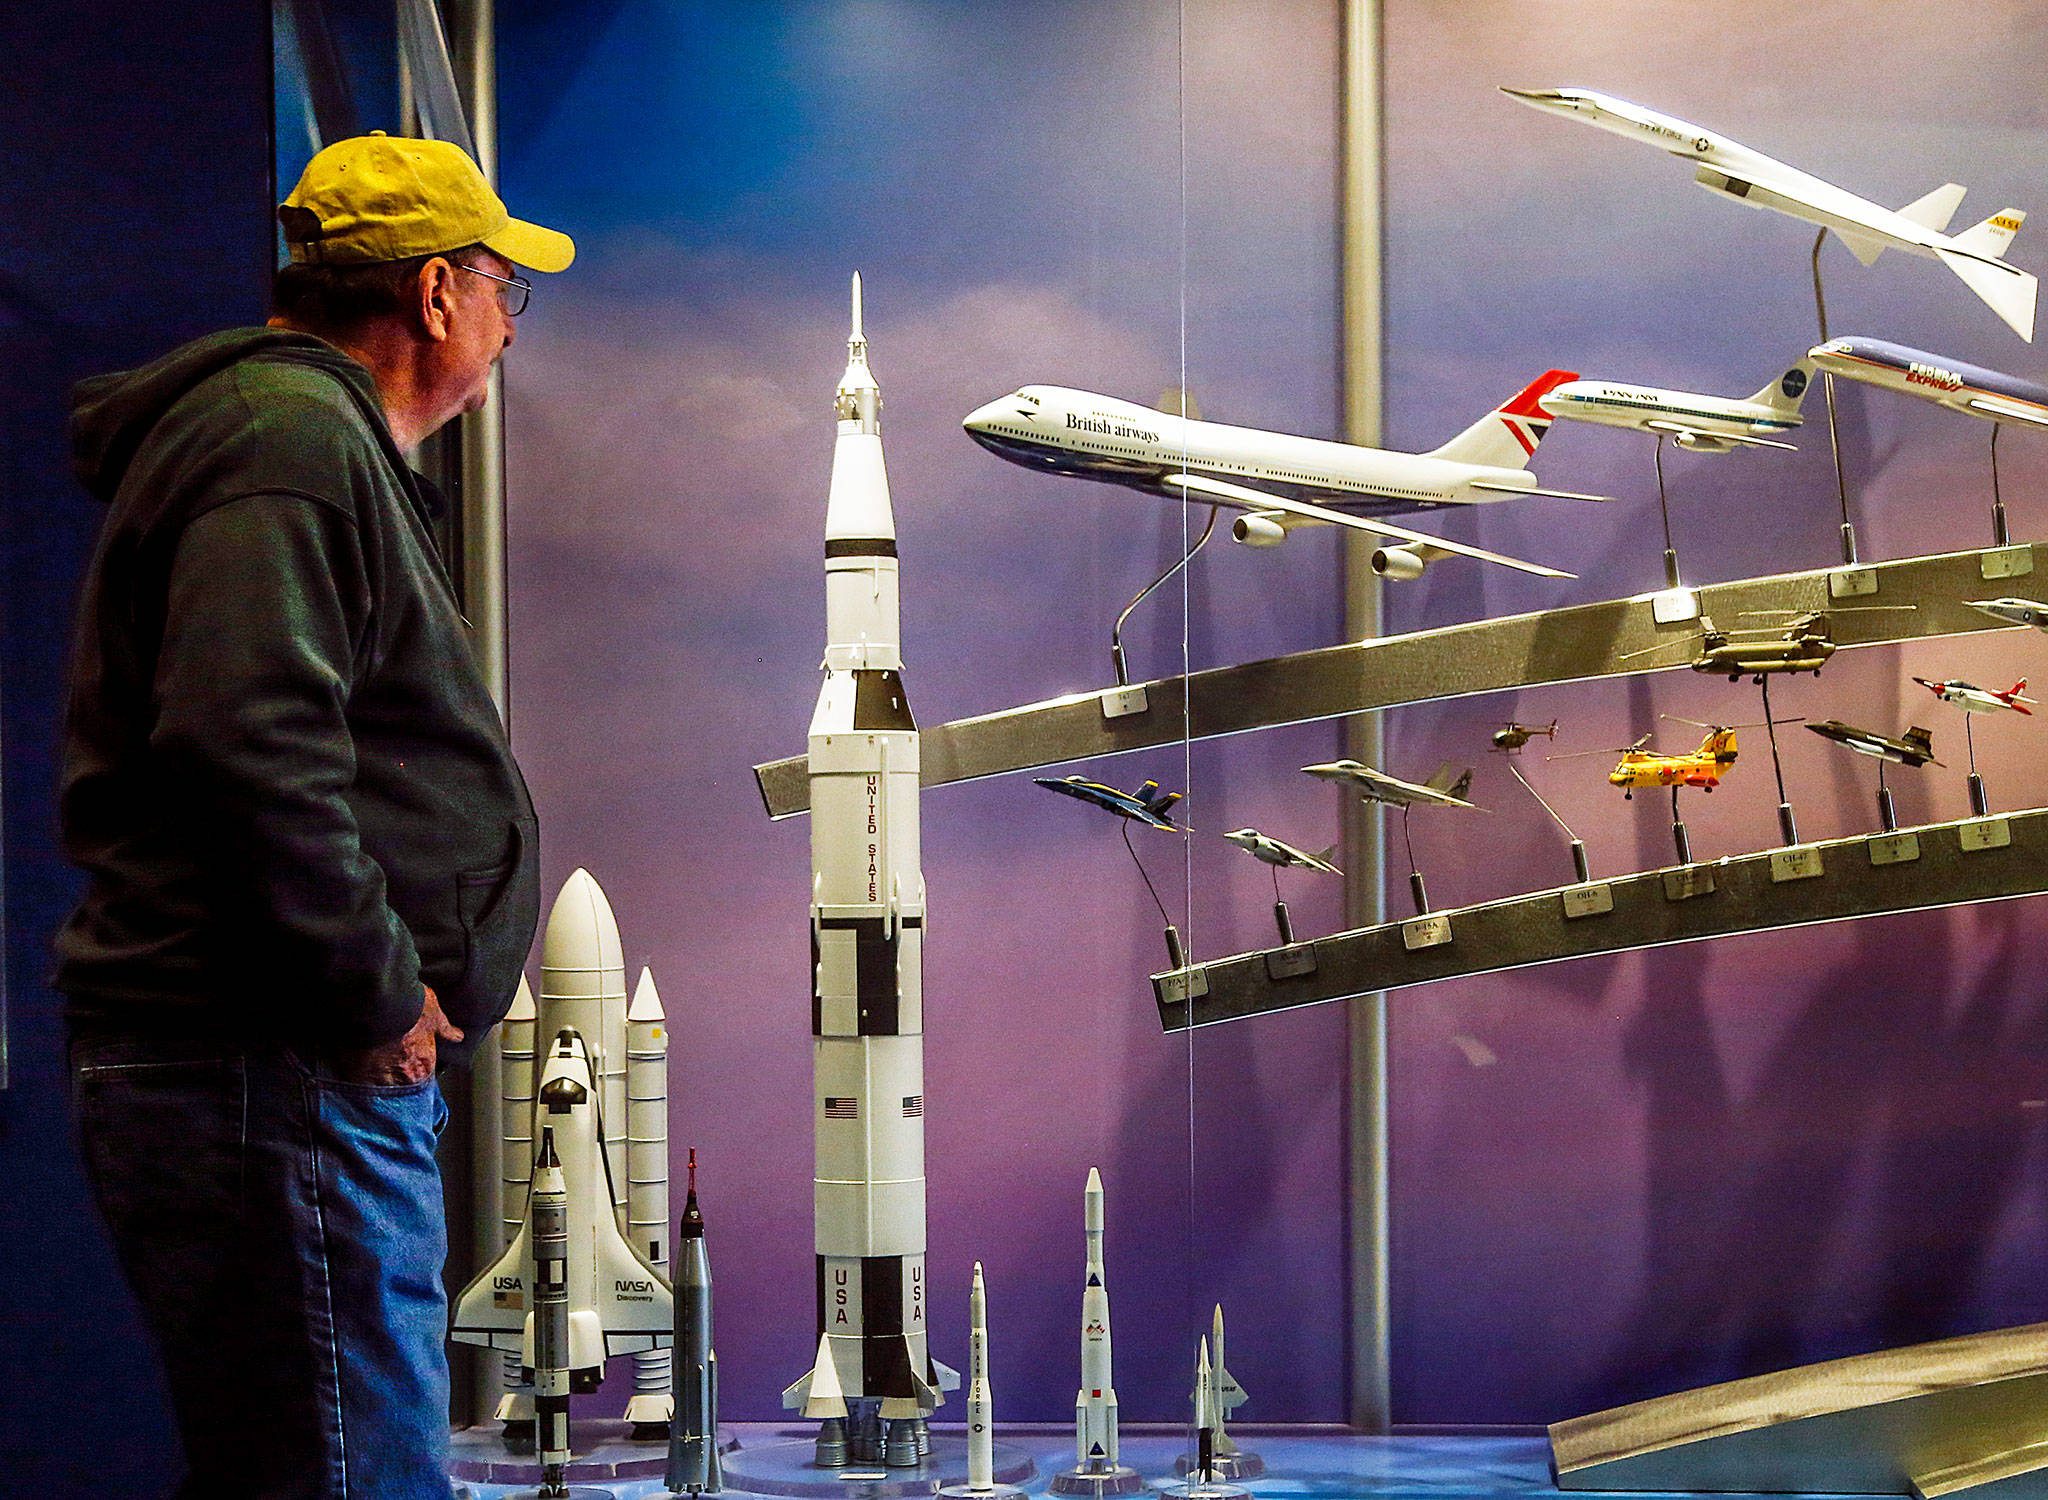 At the Future of Flight Aviation Center, a visitor pauses at a display case where a model of a British Airways 747 (center) is exhibited next to models of rockets, spaceships and supersonic aircraft. By the end of this year, the 747 will no longer be flown by any U.S. airlines on passenger flights. (Dan Bates / The Herald)